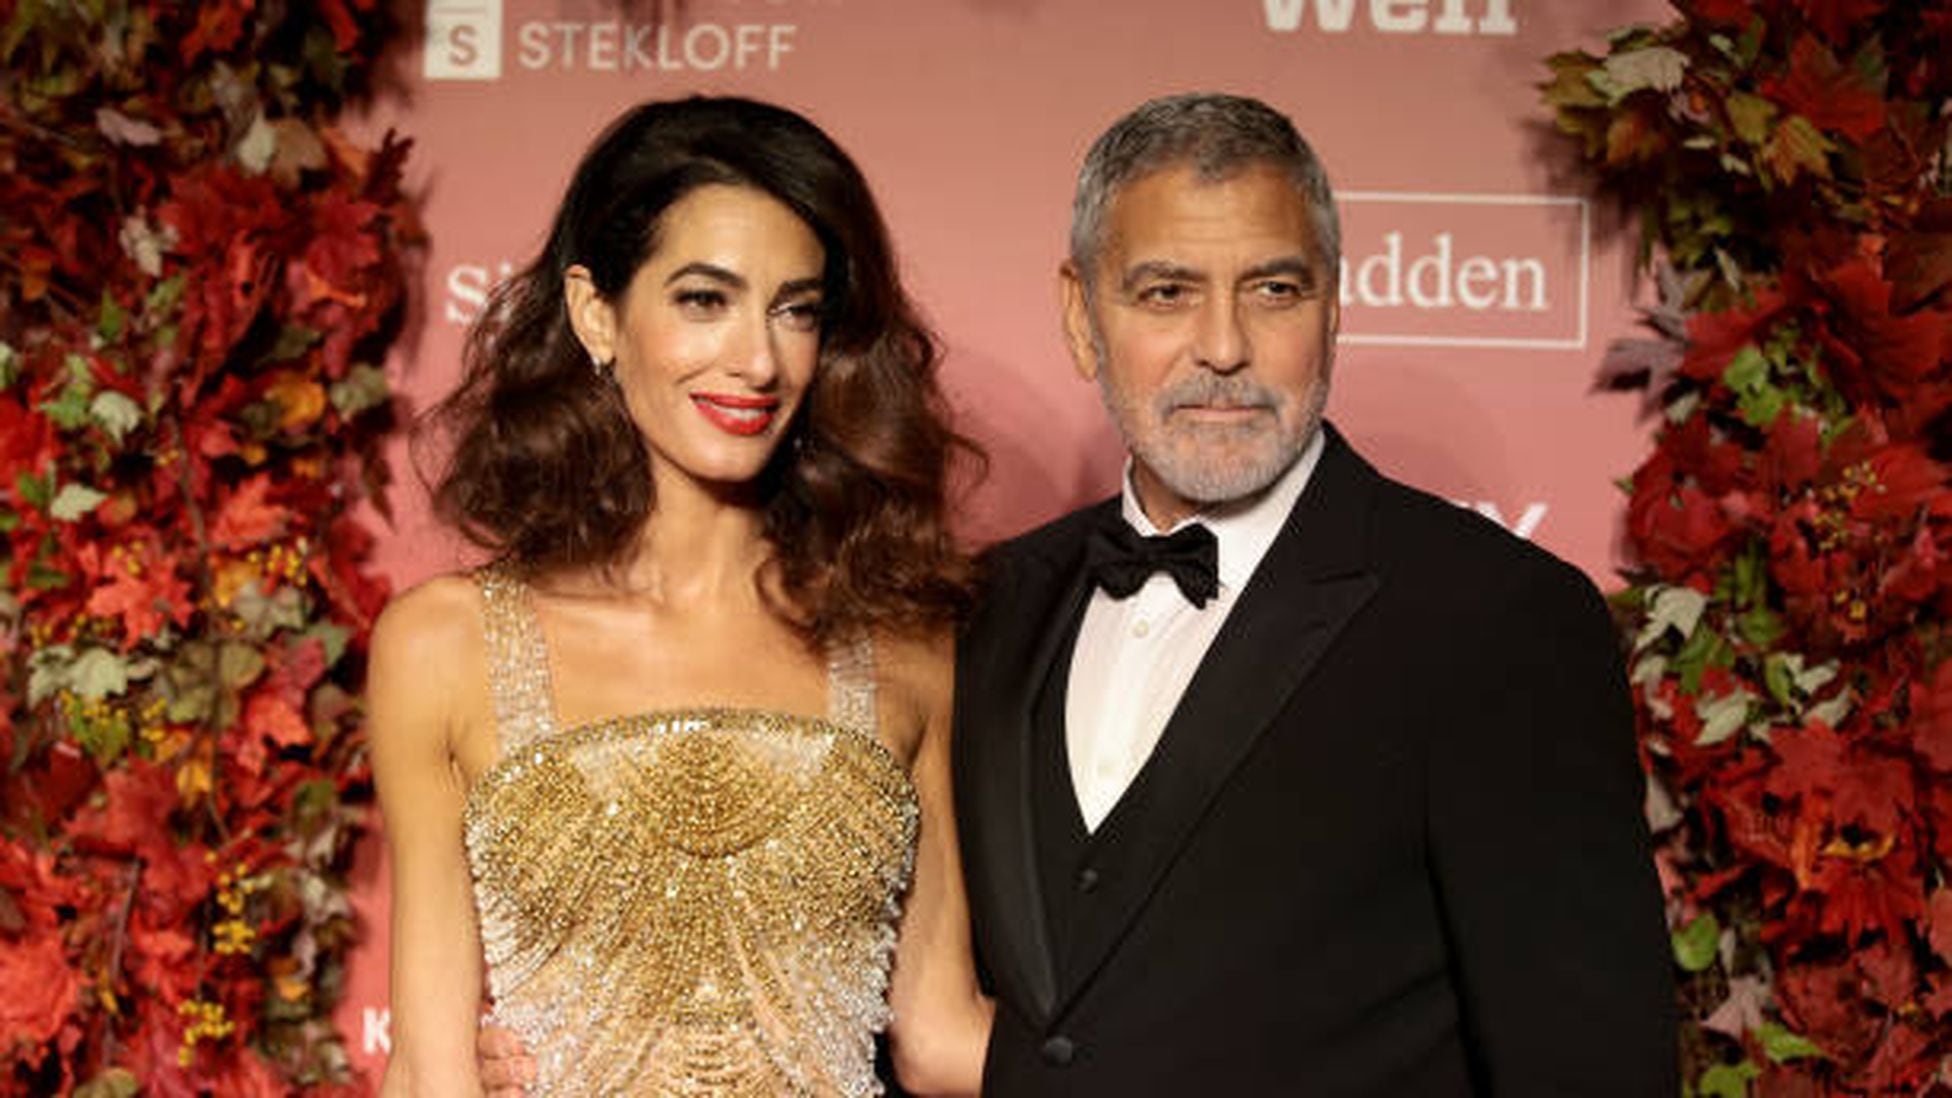 Who Is George Clooney’s, Wife Amal Clooney?